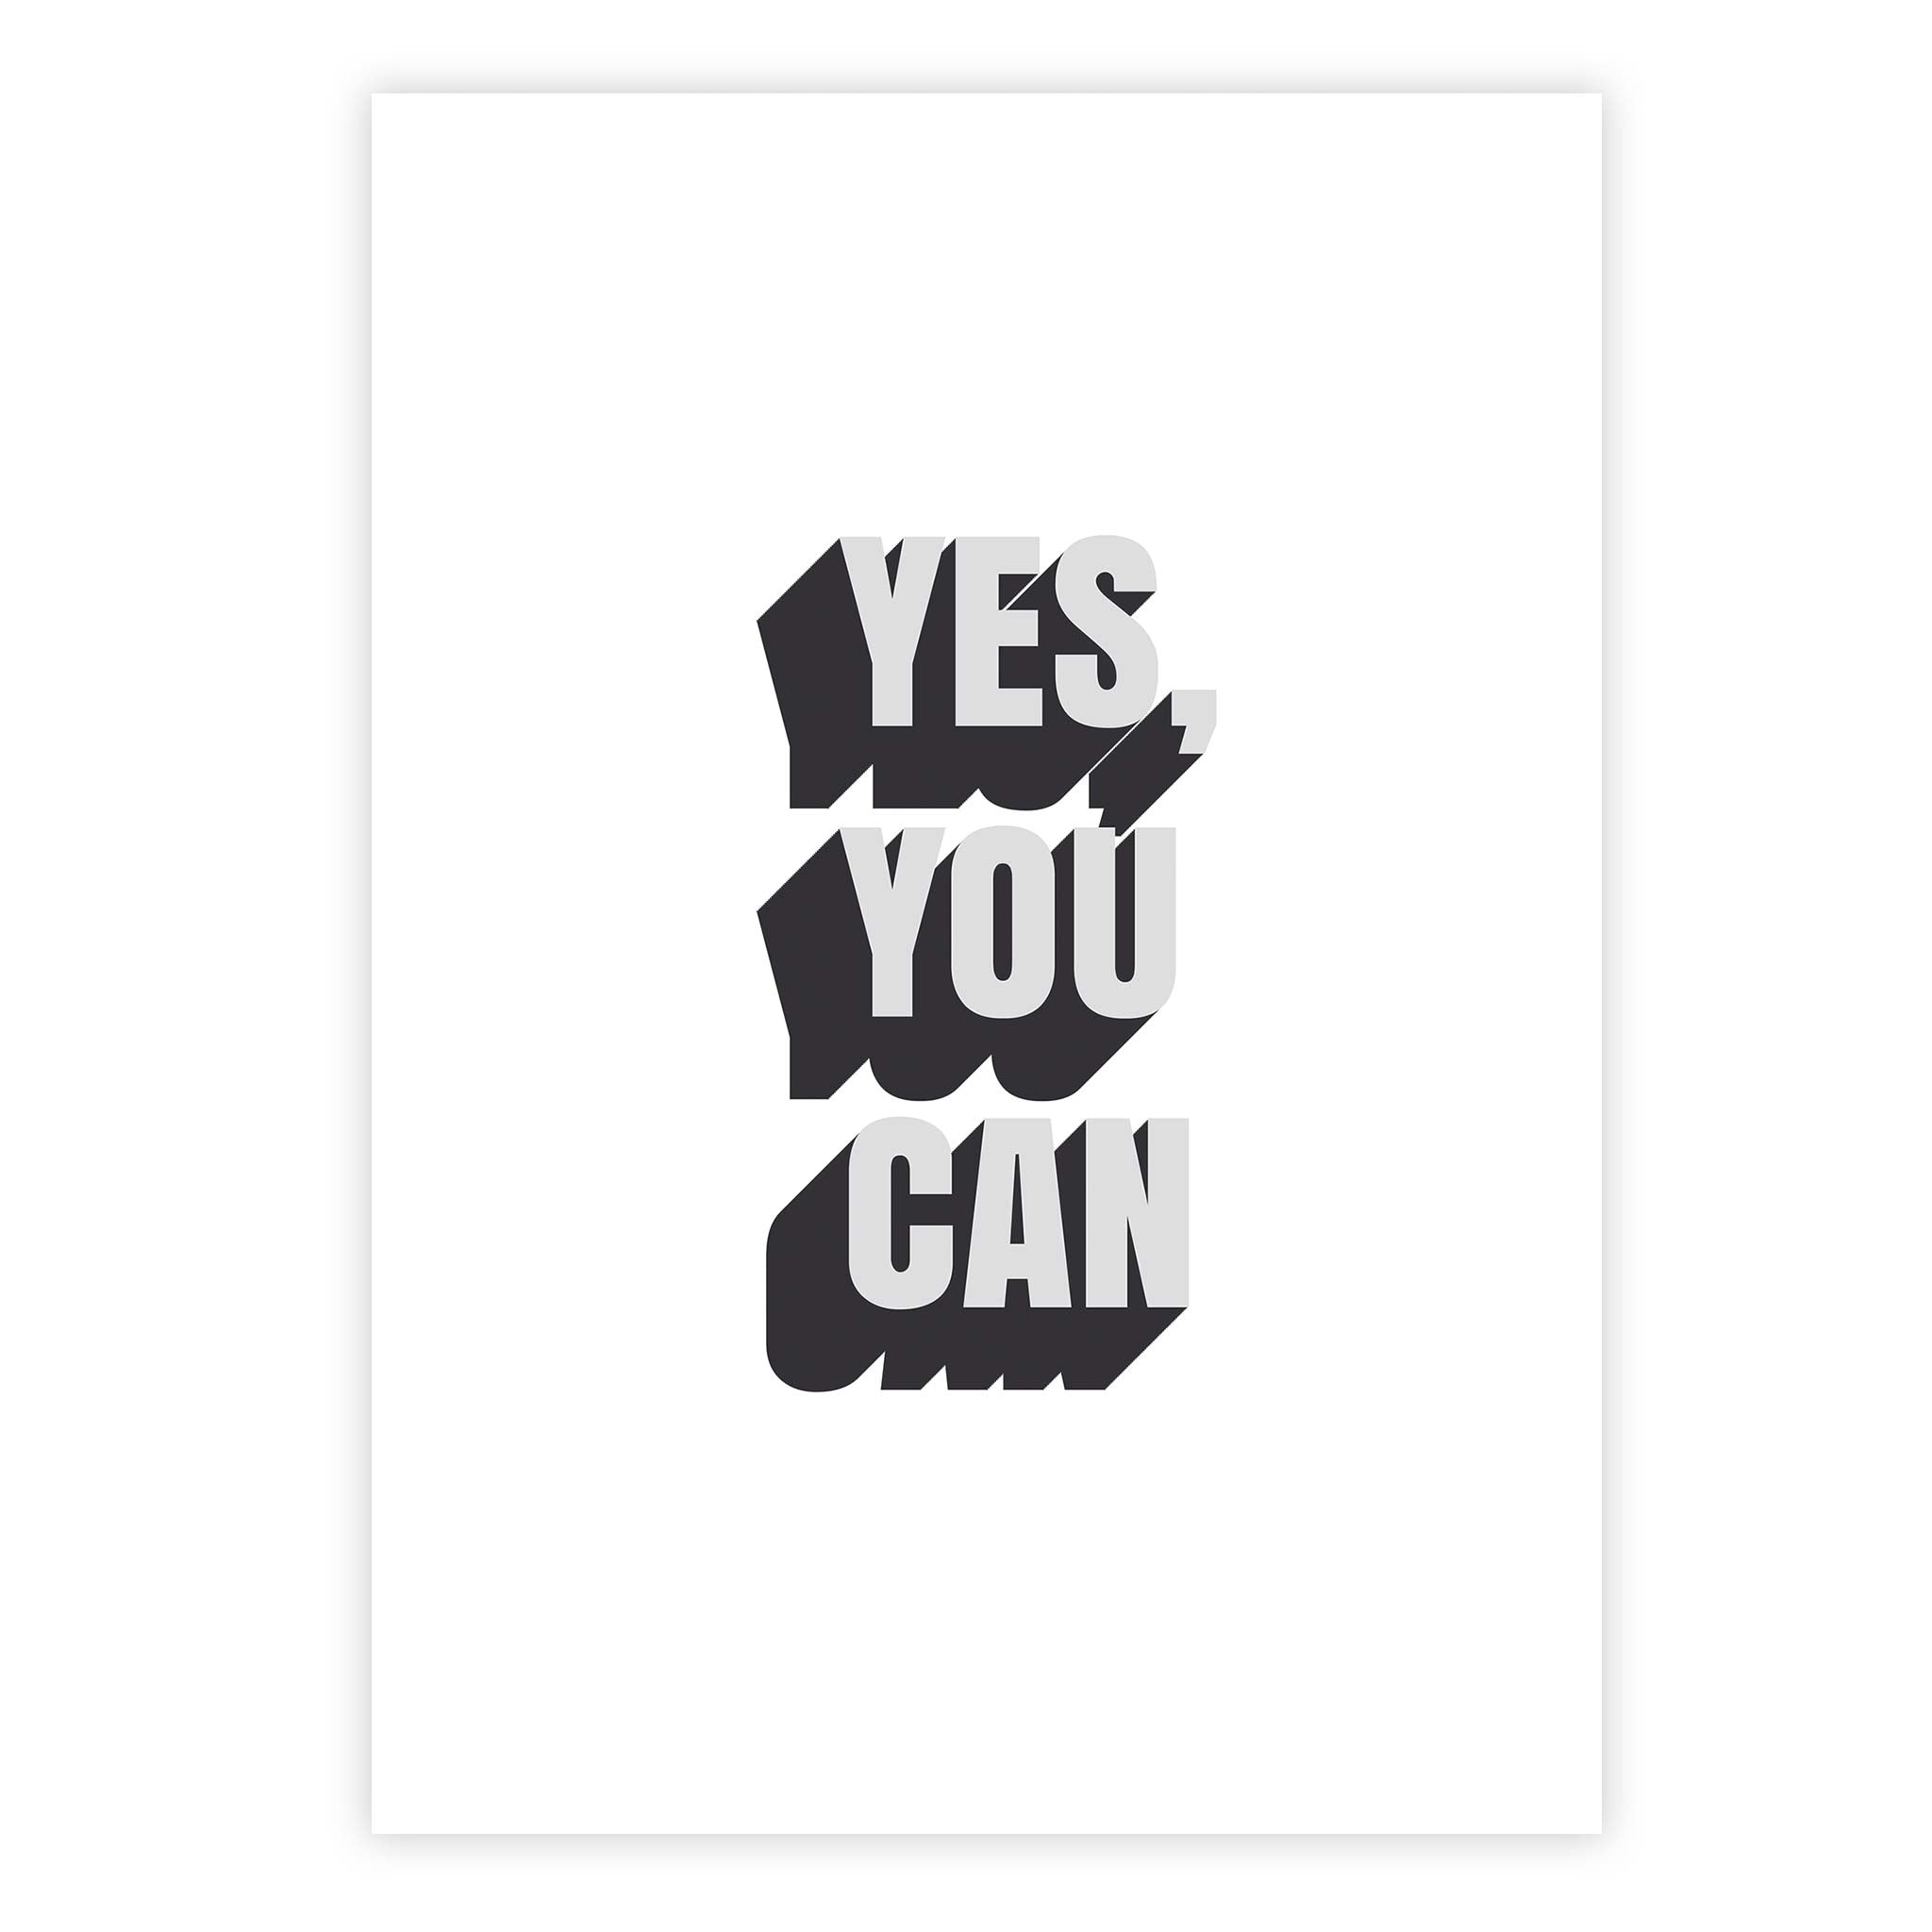 Yes, you can